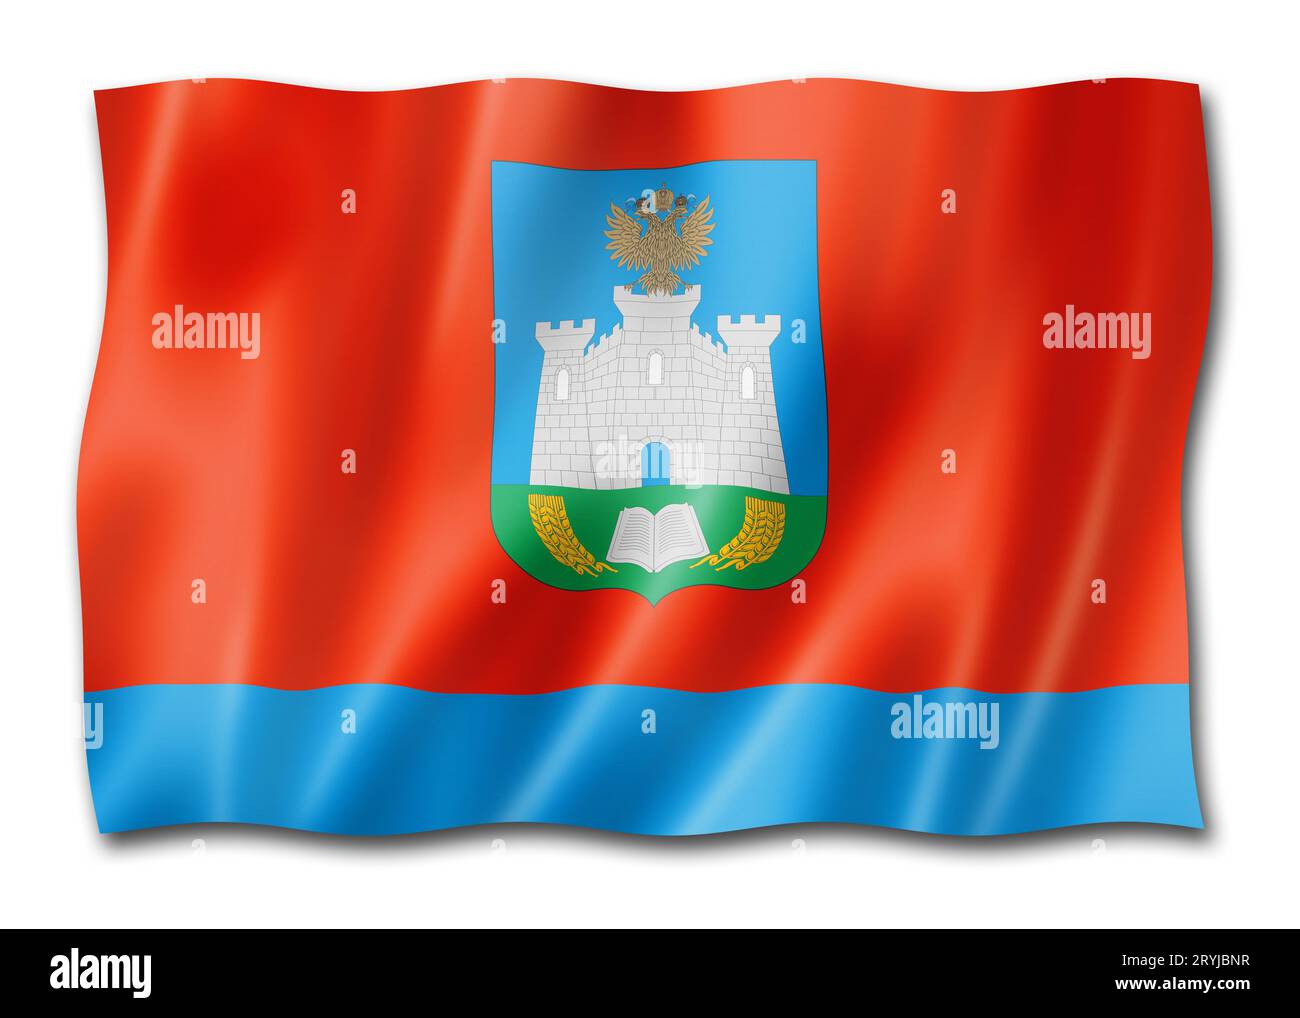 Oryol state - Oblast -  flag, Russia Stock Photo